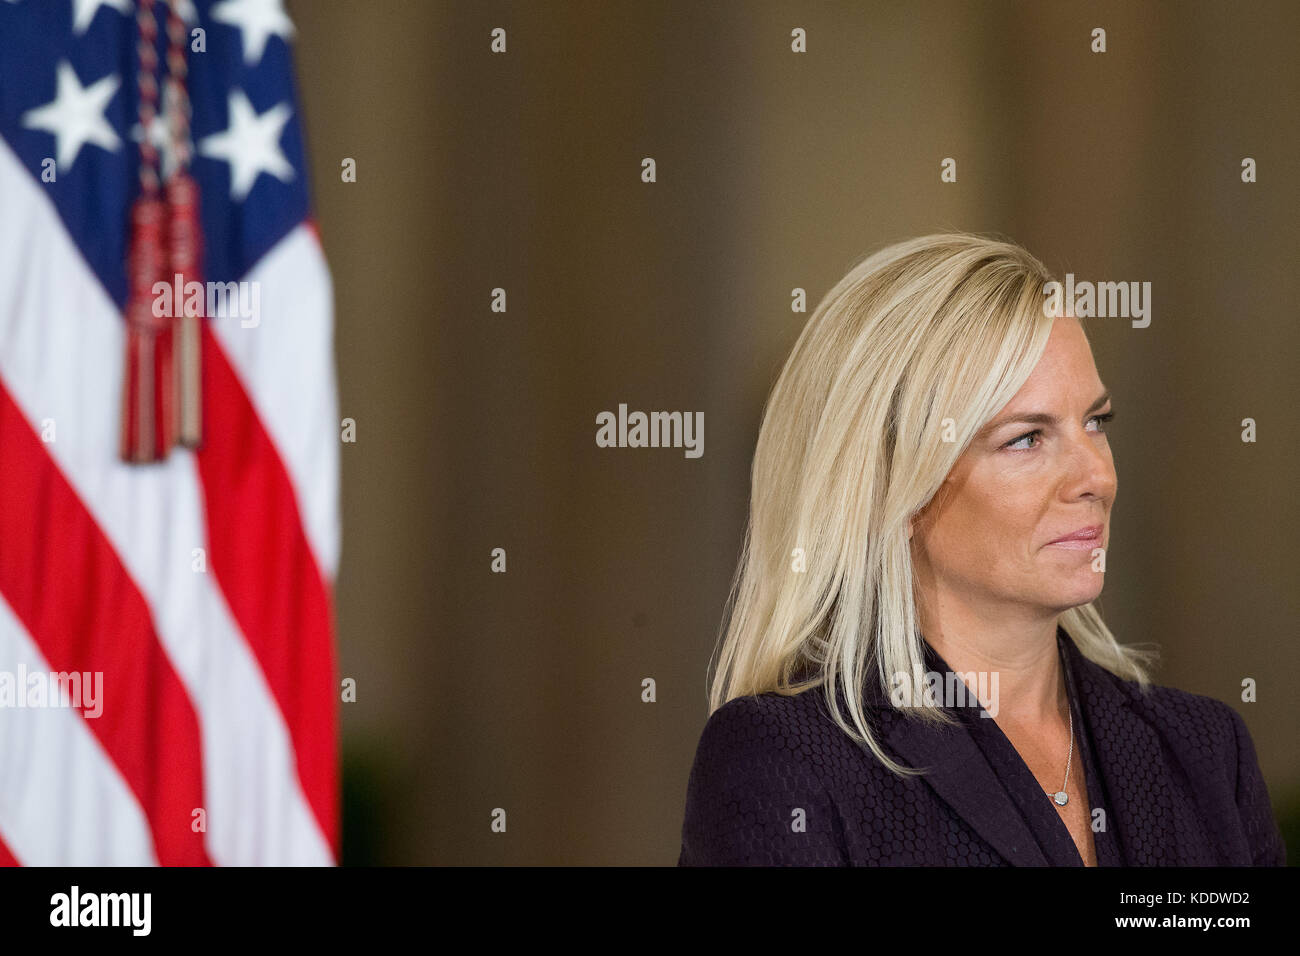 Washington, USA. 12th Oct, 2017. Kirstjen Nielsen attends her nomination announcement at the White House in Washington, DC, the United States, on Oct. 12, 2017. U.S. President Donald Trump on Wednesday nominated Kirstjen Nielsen, an aide to White House Chief of Staff John Kelly, to be Secretary of Homeland Security. Credit: Ting Shen/Xinhua/Alamy Live News Stock Photo